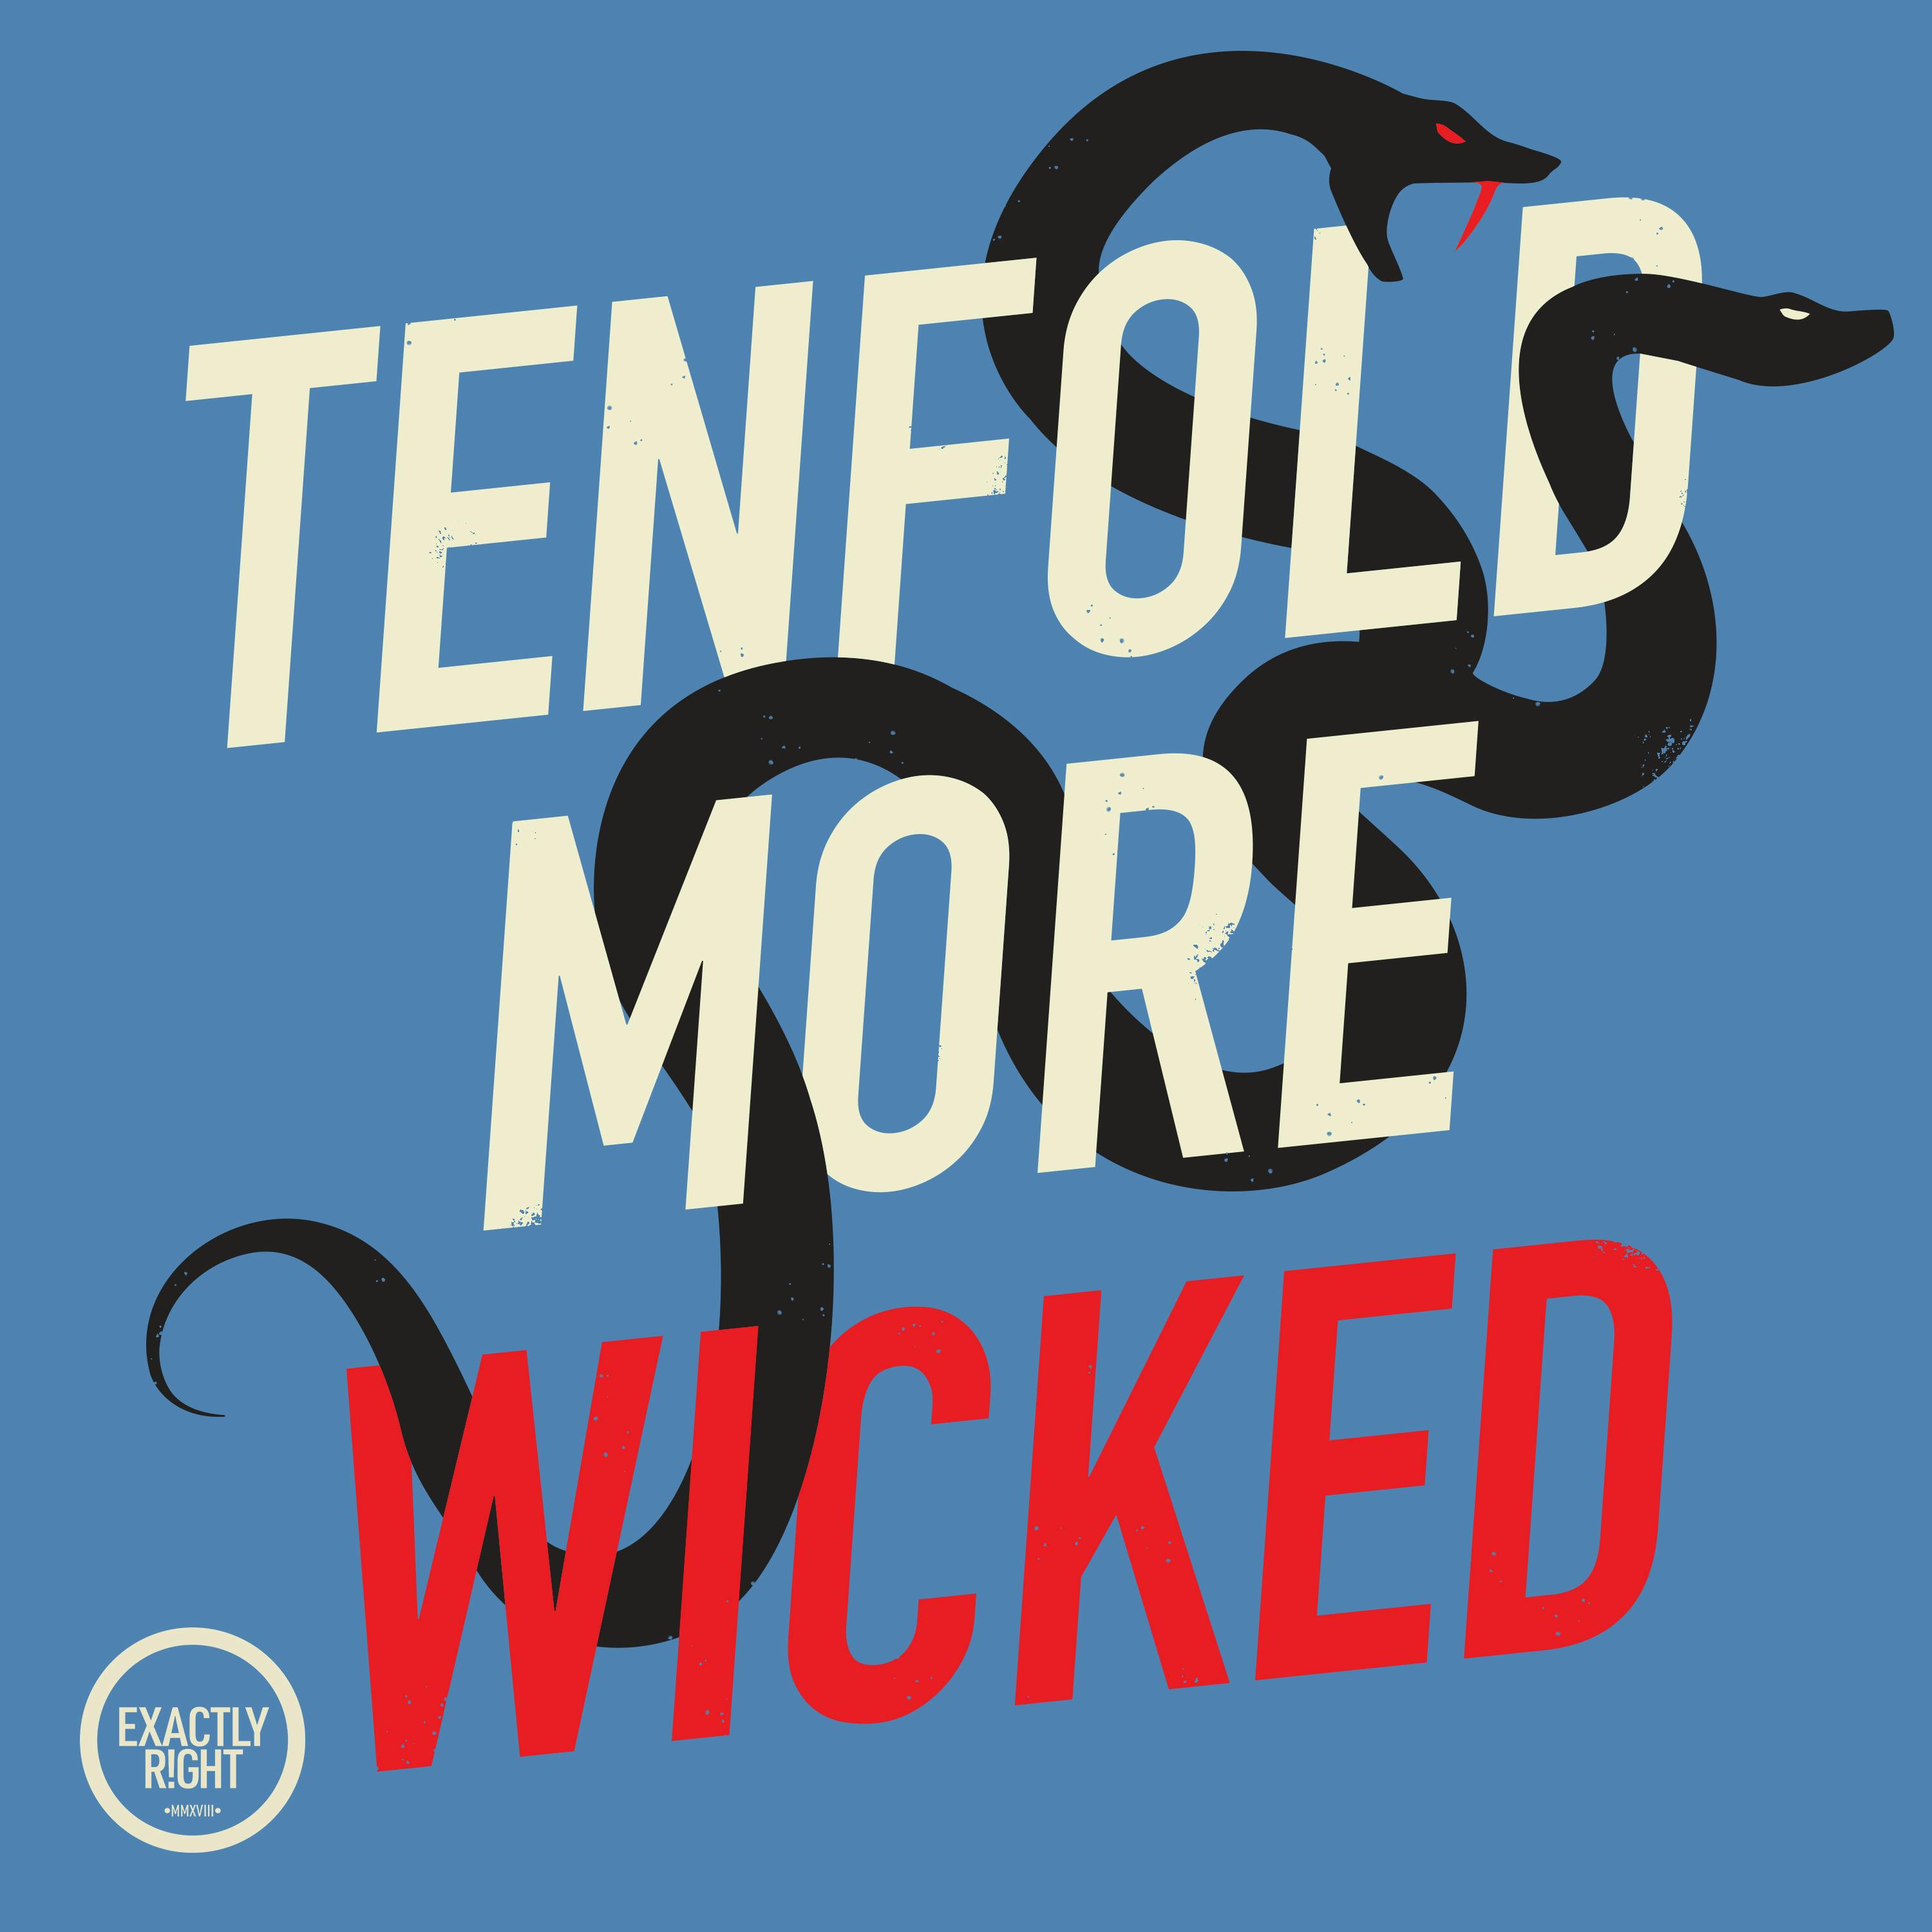 Tenfold More Wicked - A Blessing and a Curse: Cursed